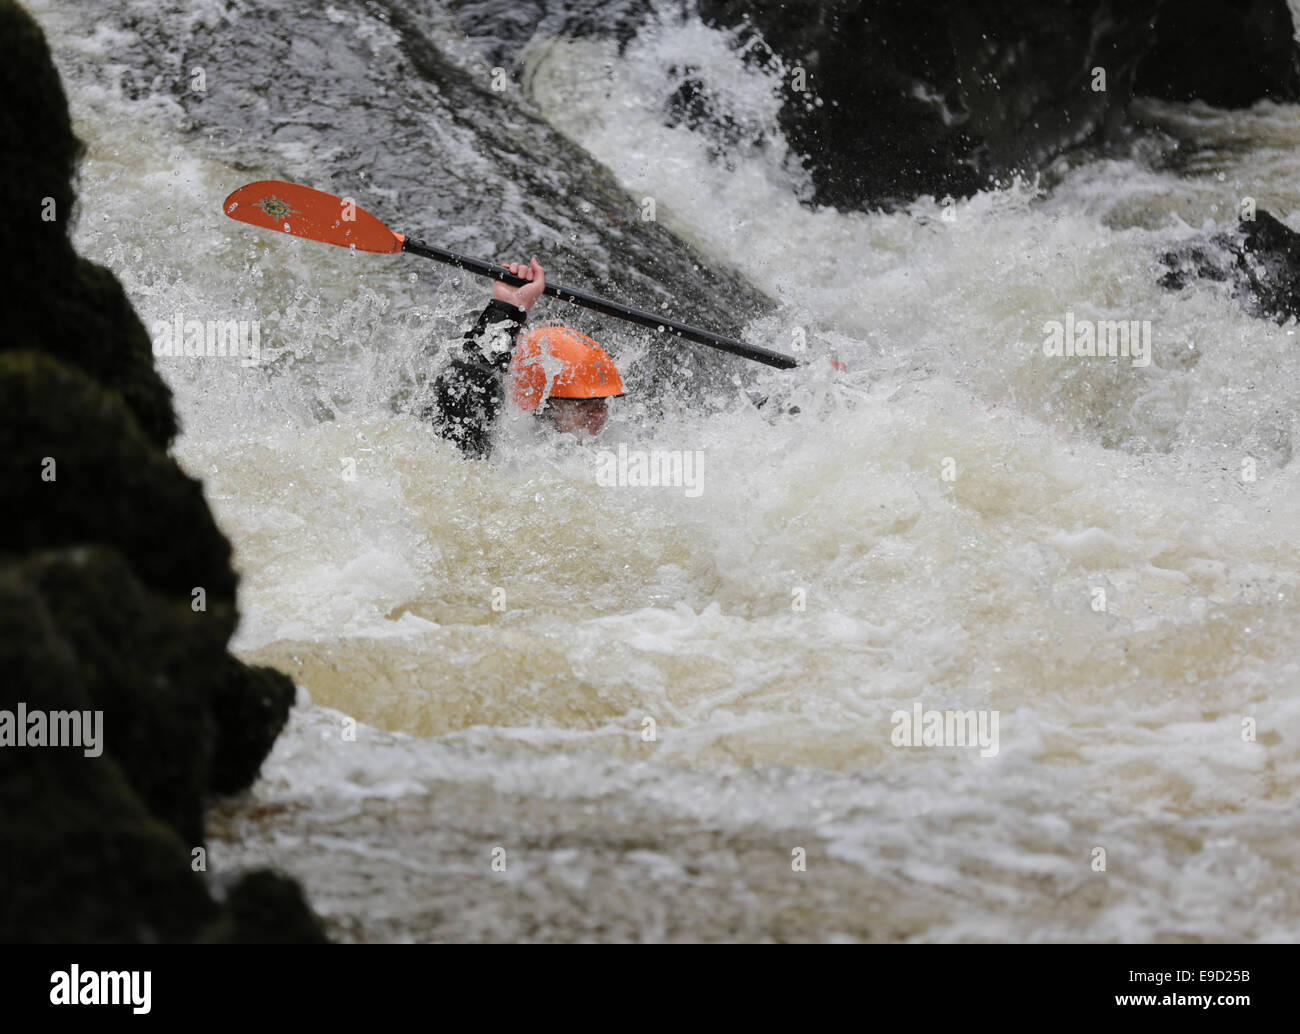 Llandysul, Wales, UK. 25th Oct, 2014. Hundreds of paddlers gather at Llandysul to enjoy the annual two day Teifi Tour, The Tour comprises six stages along the Teifi River, from Llanfihangel yr Arth, down to Poppit Sands, offering kayakers stretches of white water which suit many levels of ability. Credit:  atgof.co/Alamy Live News Stock Photo